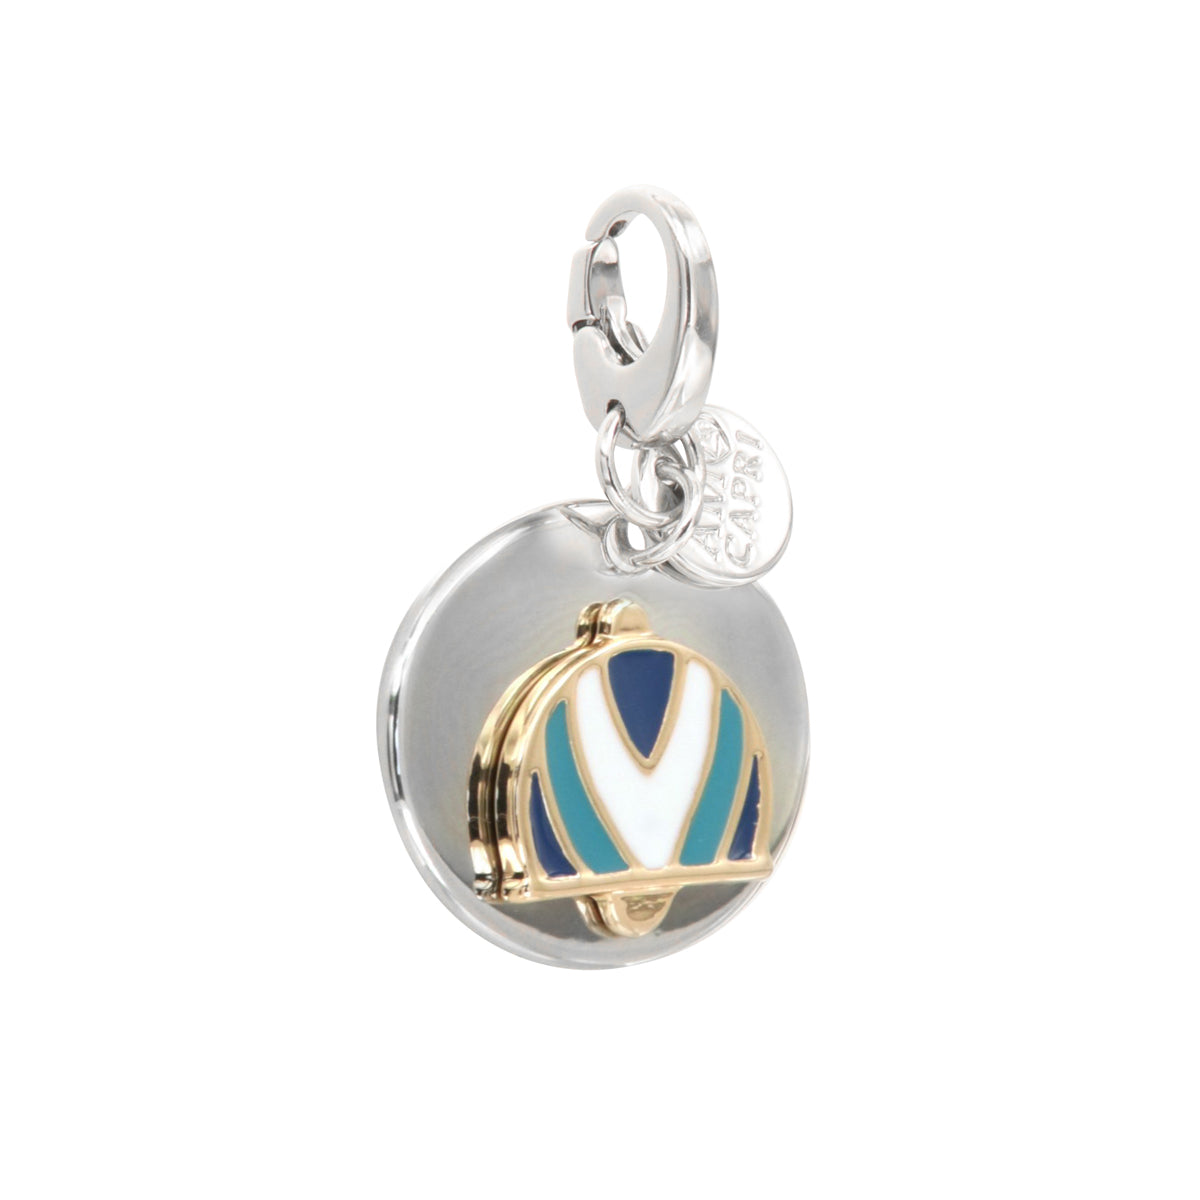 Metal pendant in medallion with a relief bell symbol, with colored glazes,